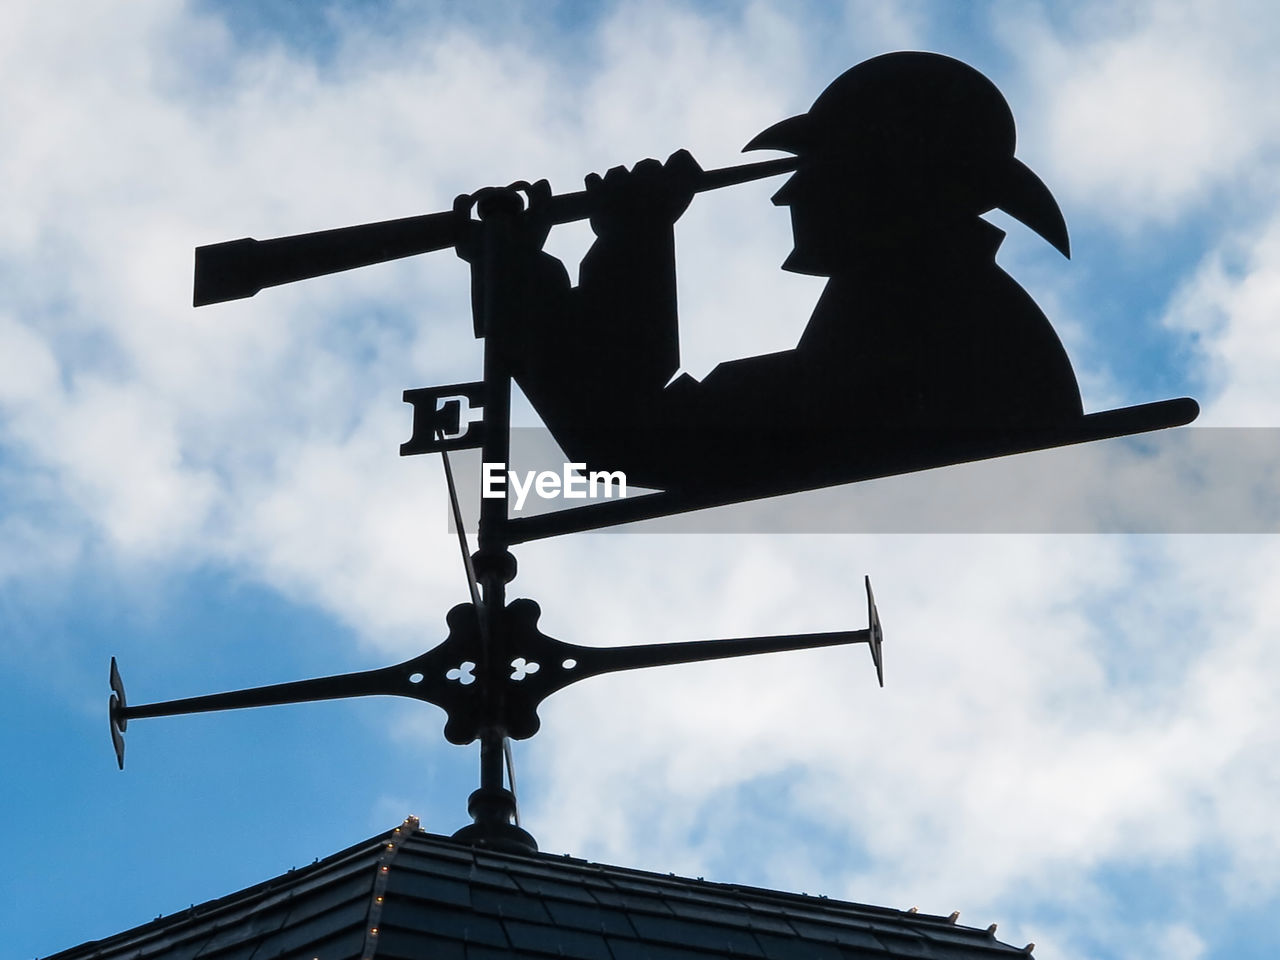 A weather vane with person looking through a telepscope